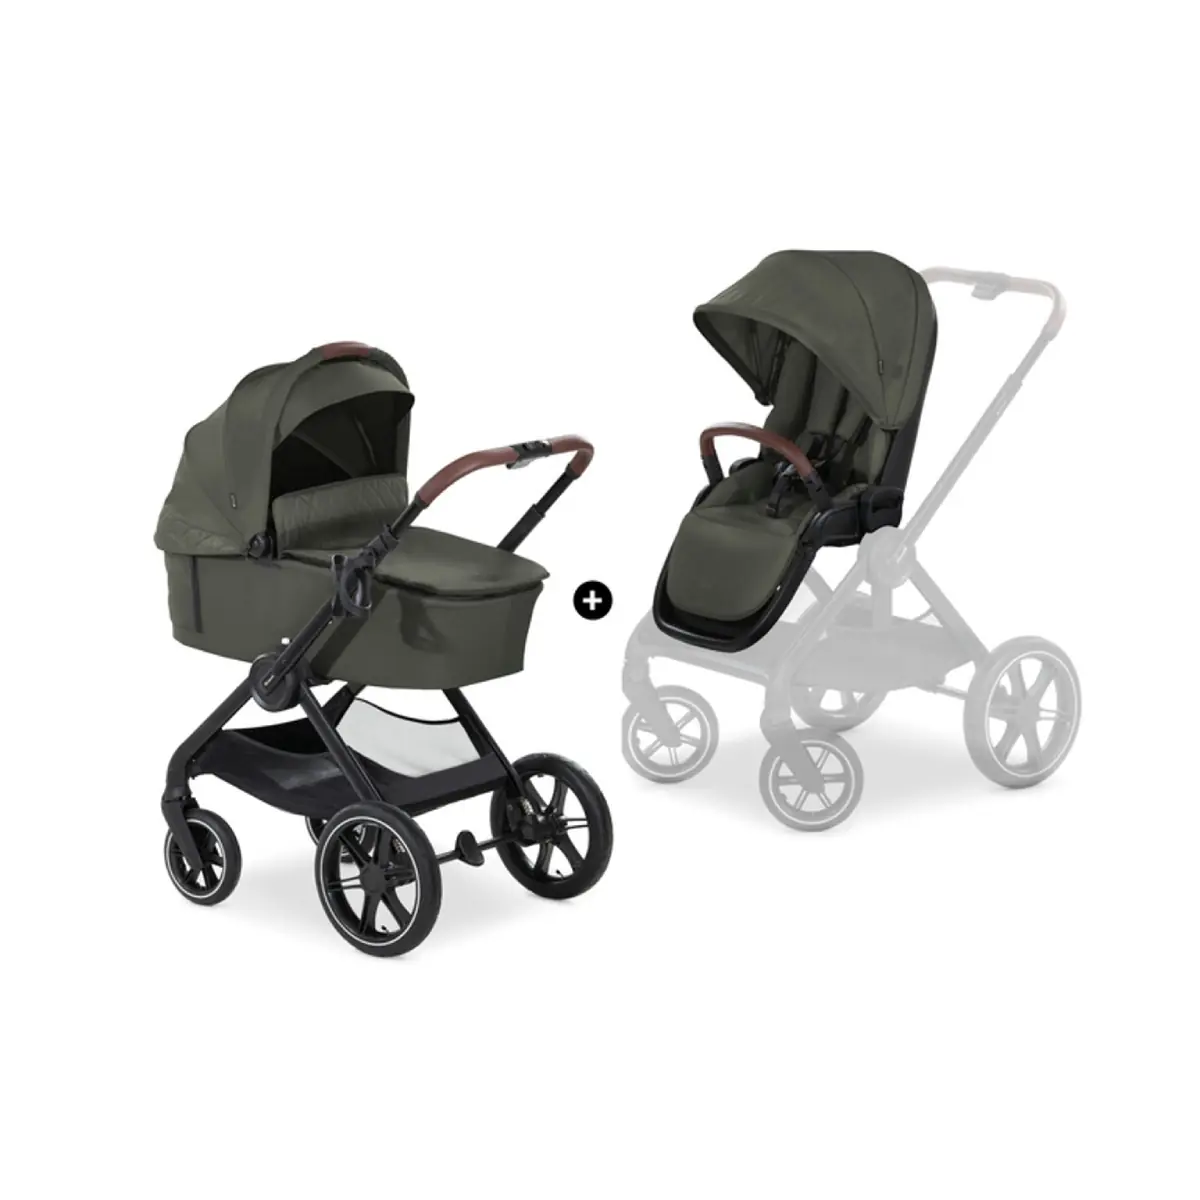 Image of Hauck Walk N Care All in One Set-Dark Olive (New)